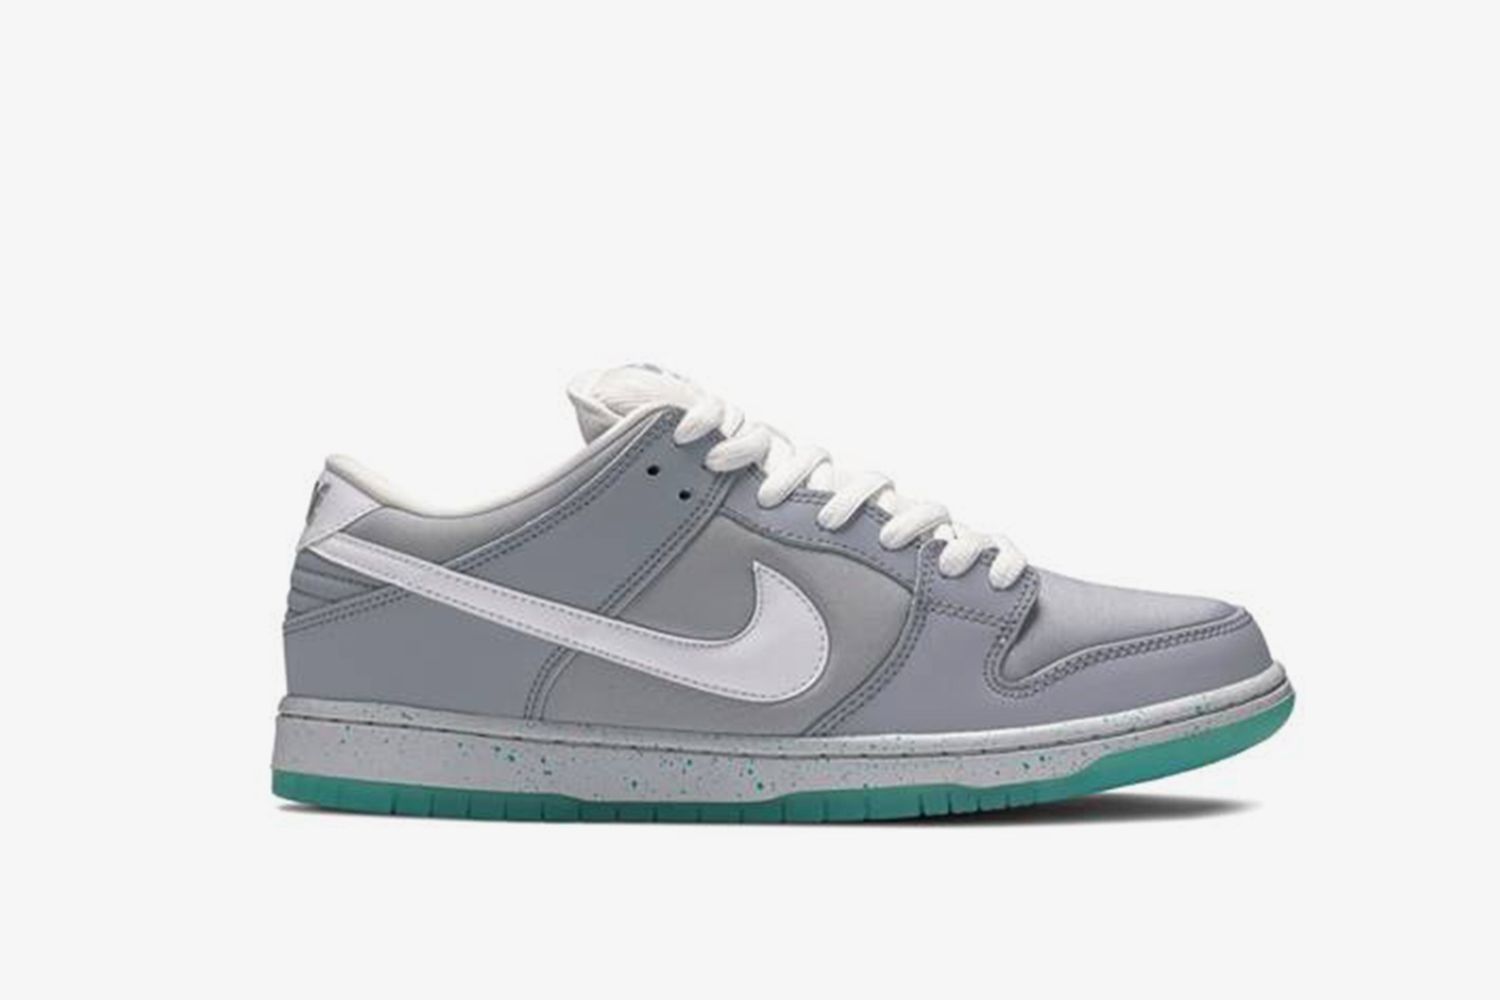 SB Dunk Low 'Marty McFly'